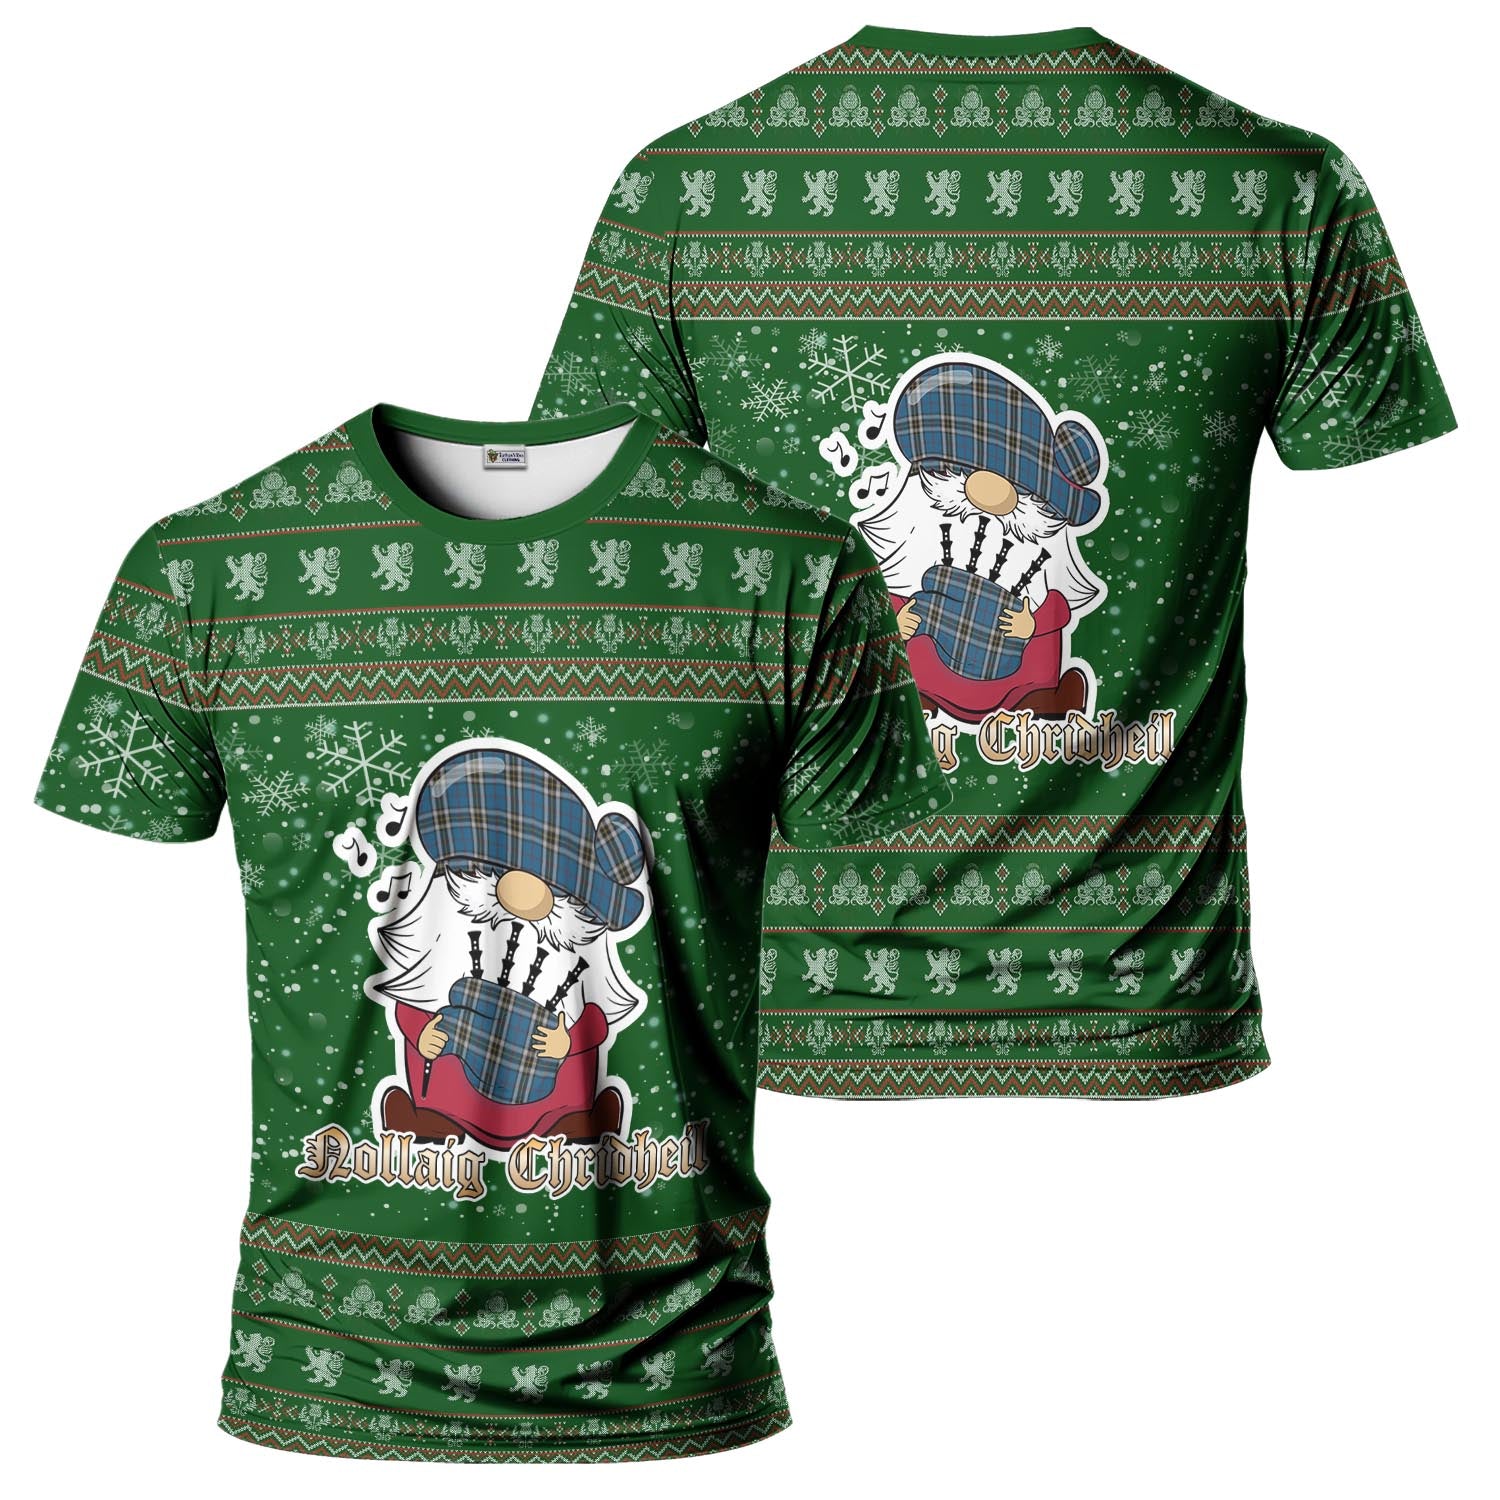 Thomson Dress Blue Clan Christmas Family T-Shirt with Funny Gnome Playing Bagpipes Men's Shirt Green - Tartanvibesclothing